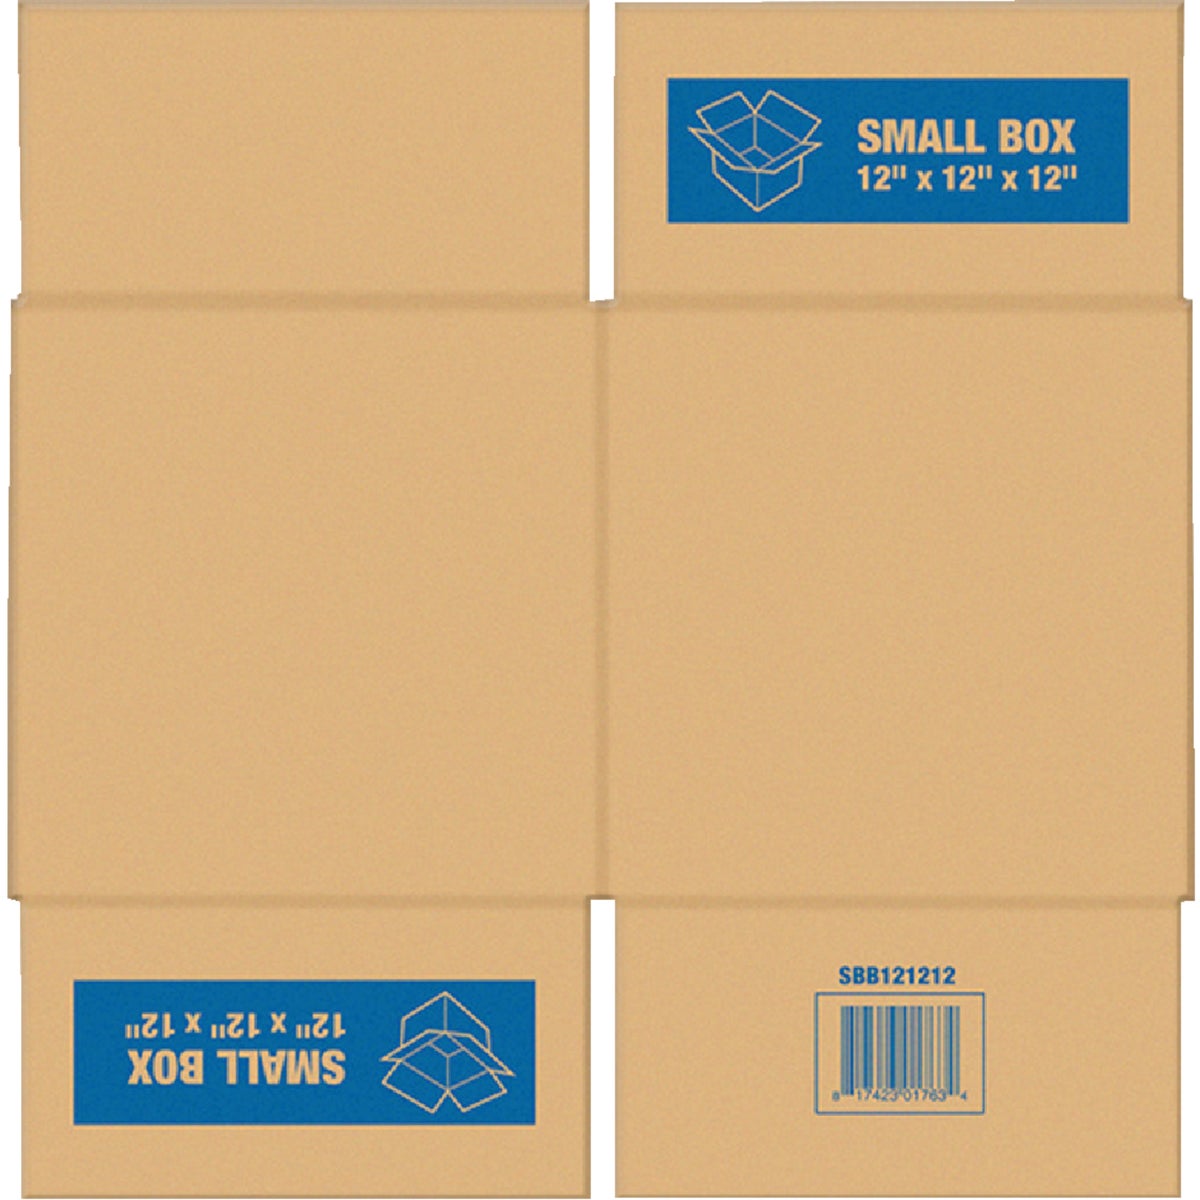 Item 992496, These cardboard moving boxes range from small to large sizes.